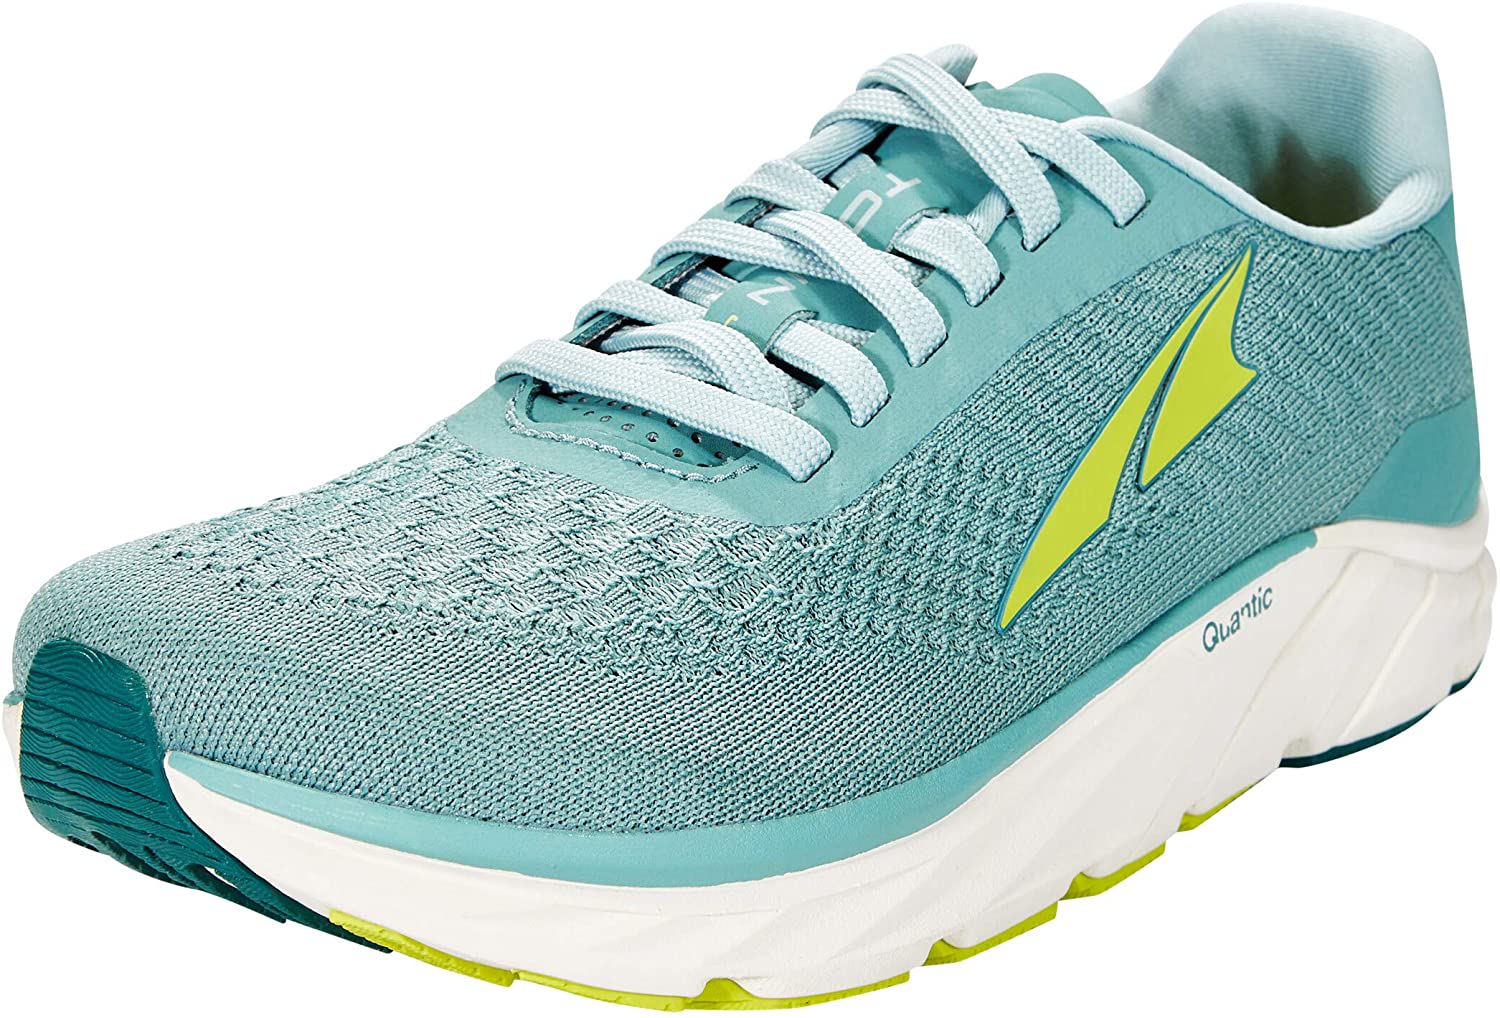 Altra Women's Torin 4.5 Plush Road Running Shoe in Mineral Blue from the side